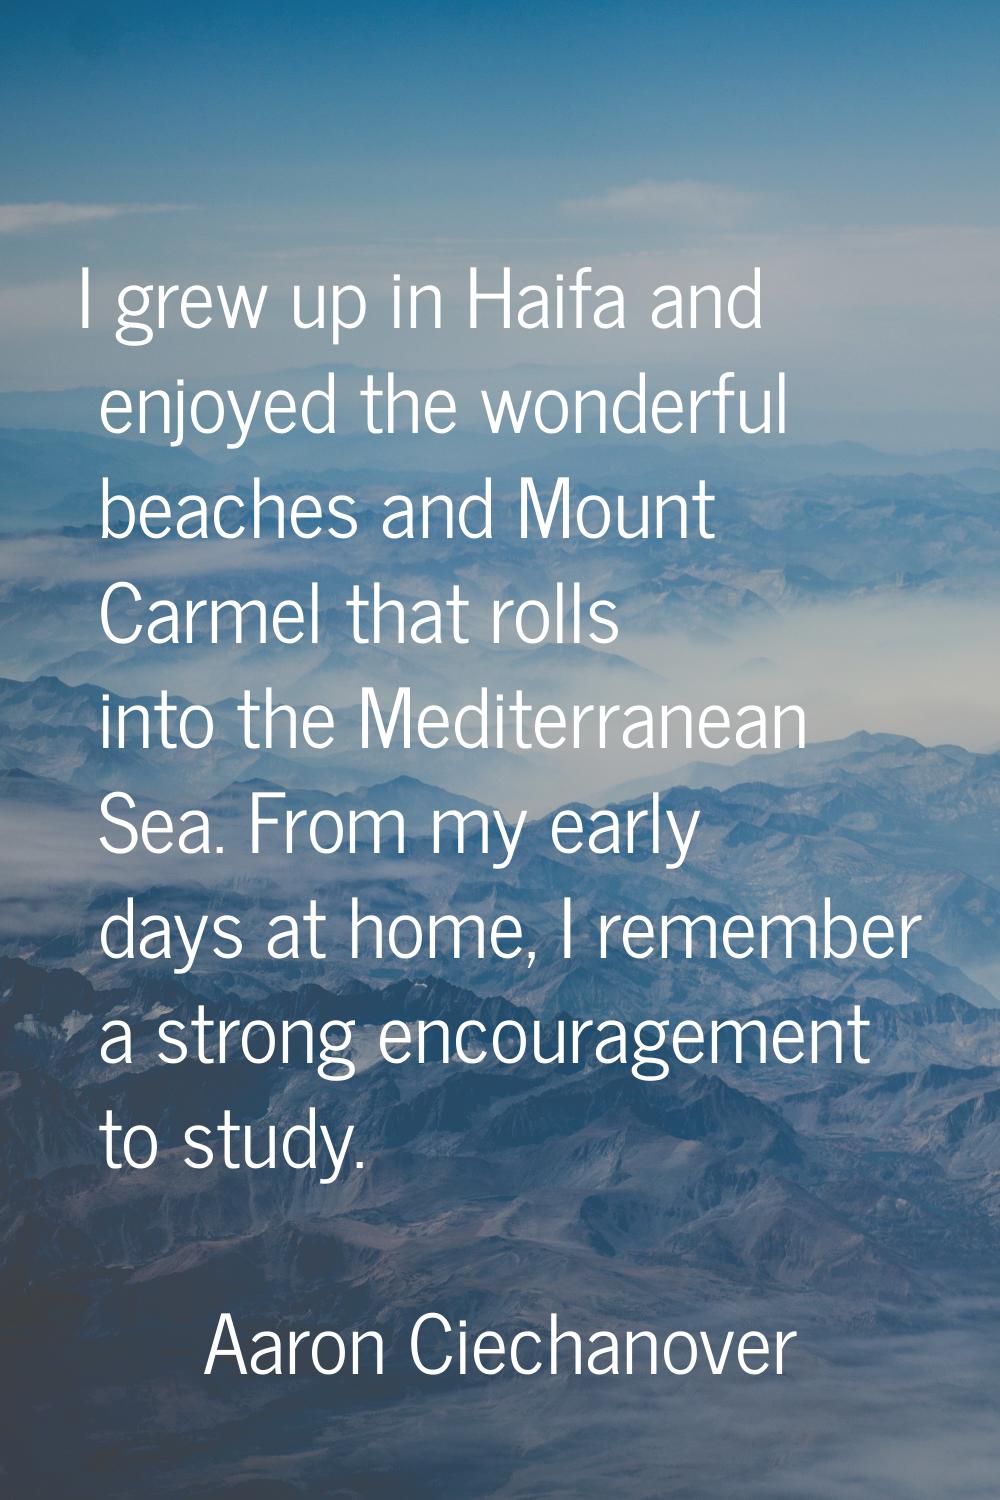 I grew up in Haifa and enjoyed the wonderful beaches and Mount Carmel that rolls into the Mediterra